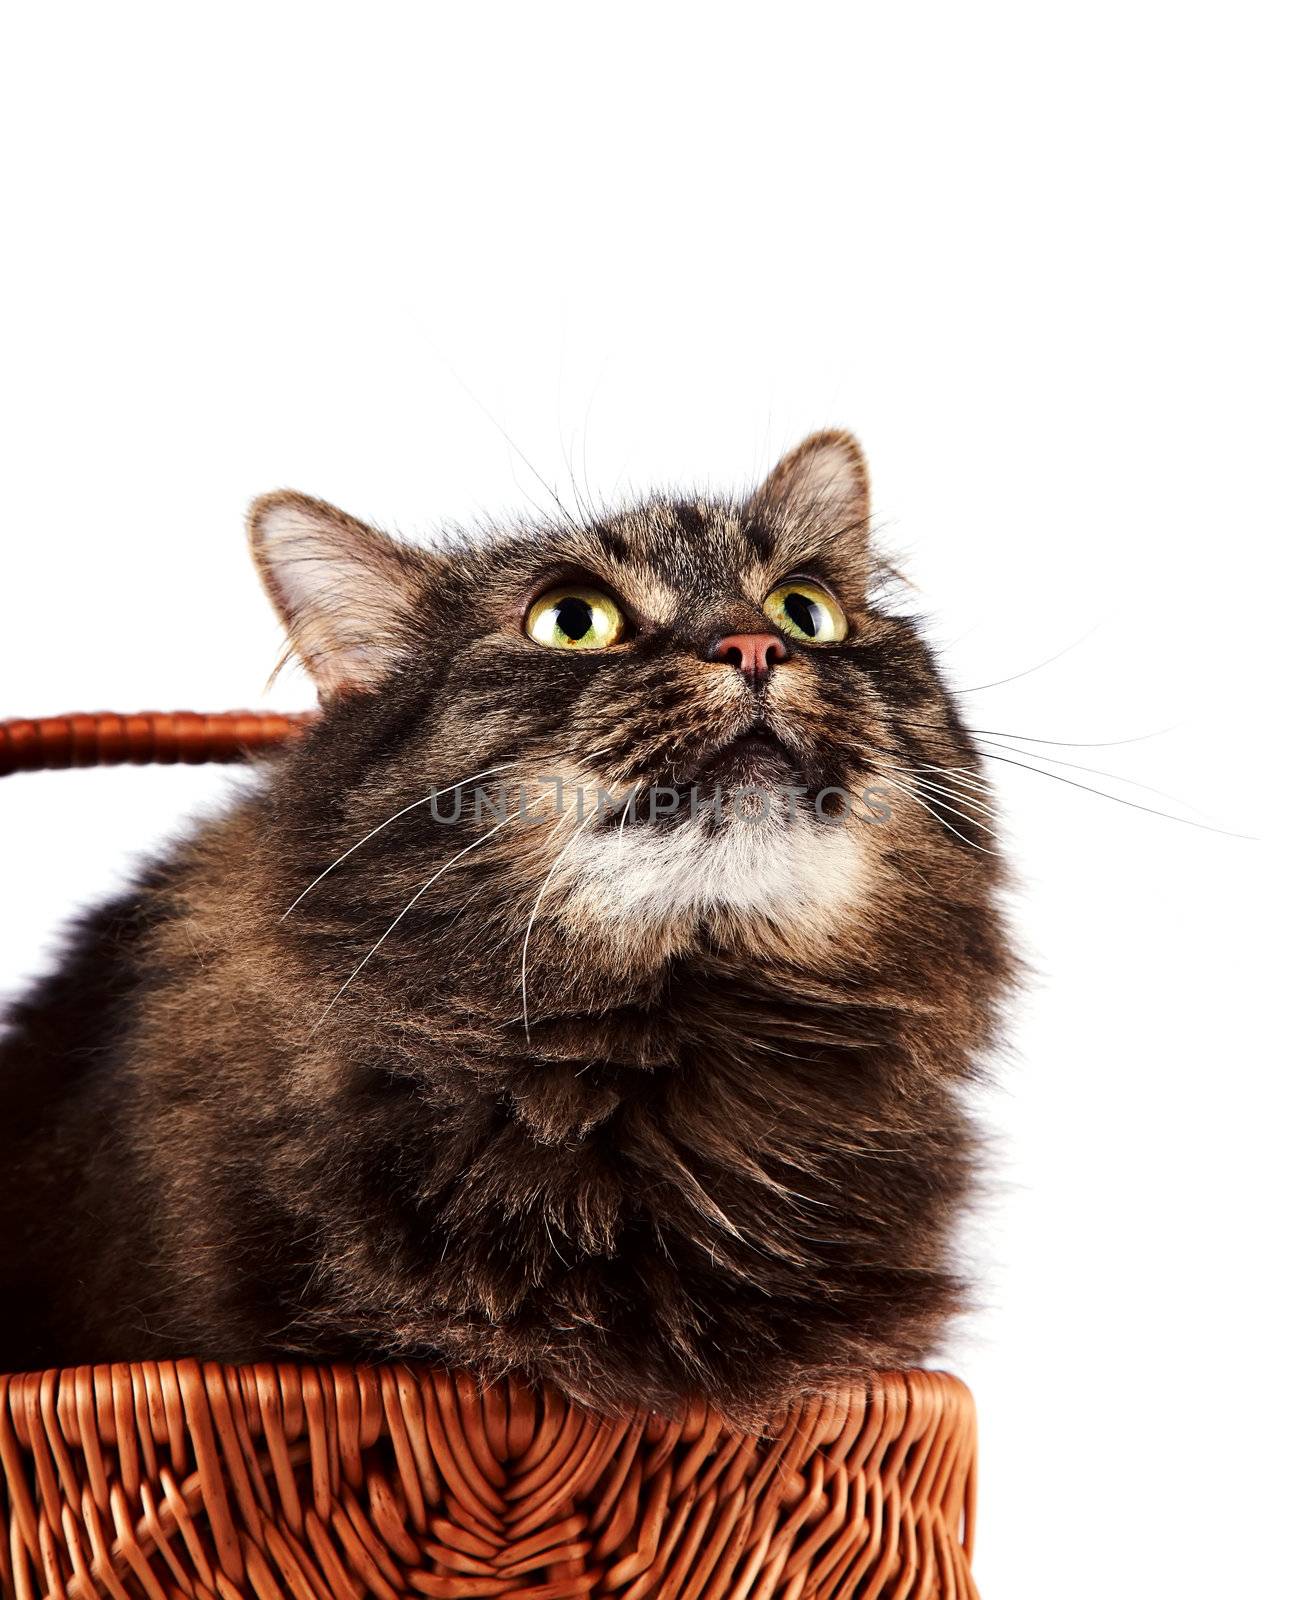 Portrait of a striped fluffy cat in a basket on a white background